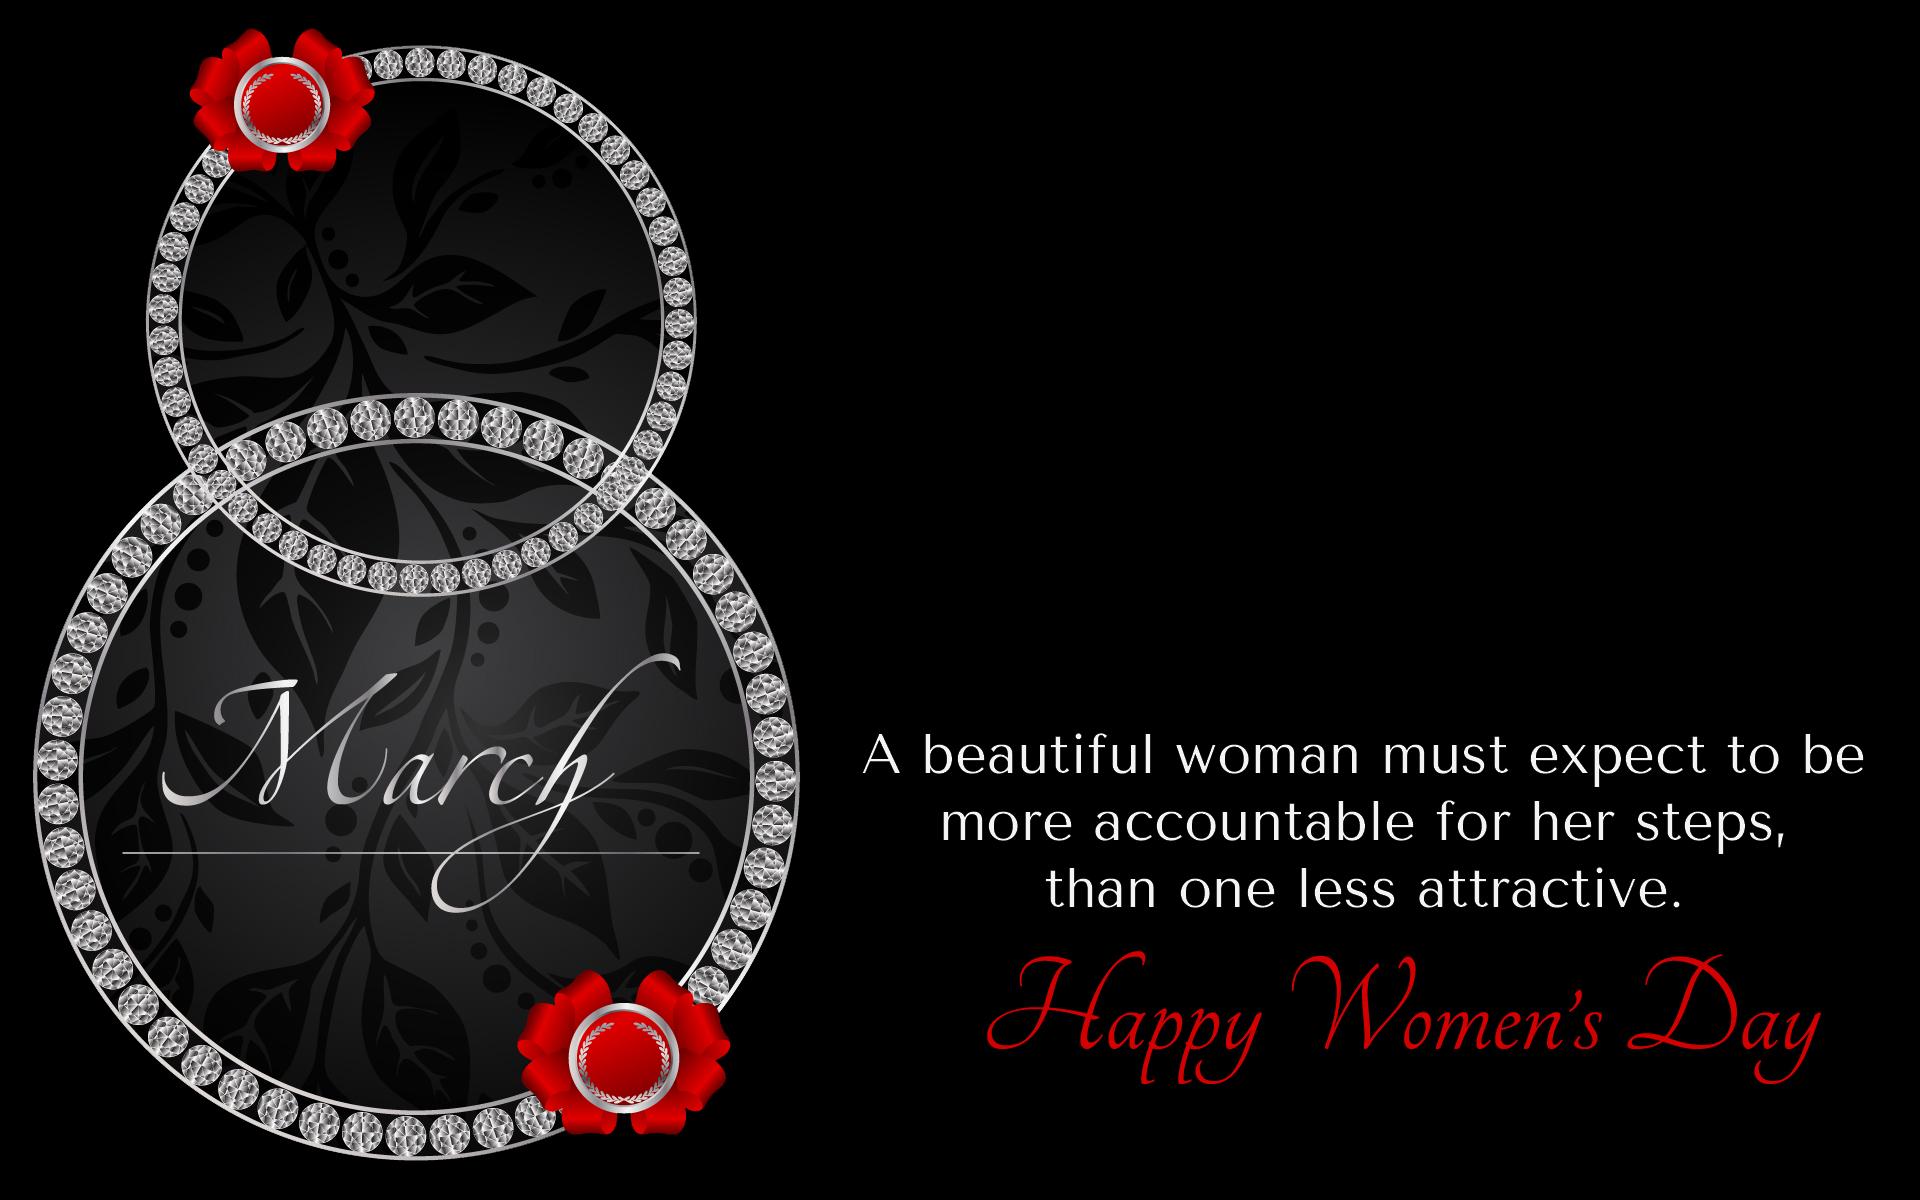 Happy Women's Day Gifts & Free Wallpaper